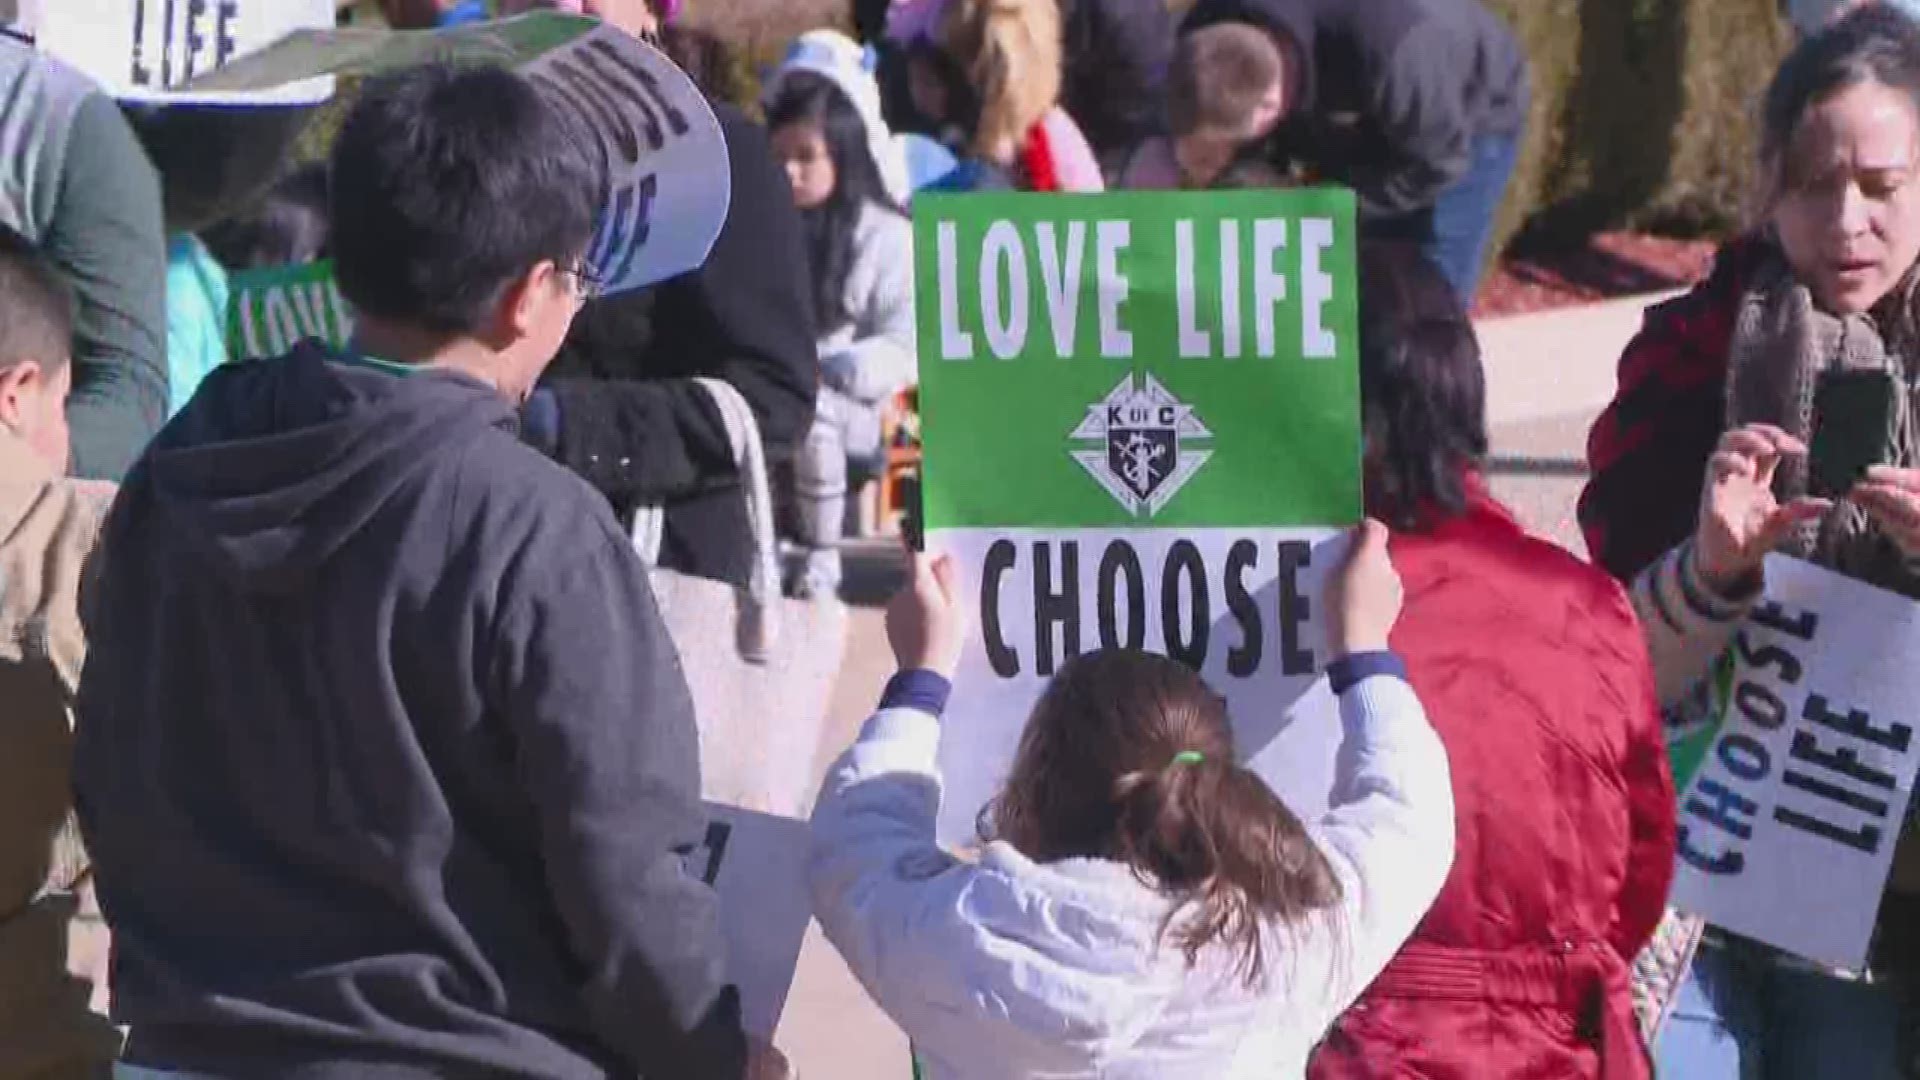 Thousands of Arkansans, including families and church groups, rallied outside the state capitol today during the 41st Annual March for Life, sponsored by Arkansas Right to Life.